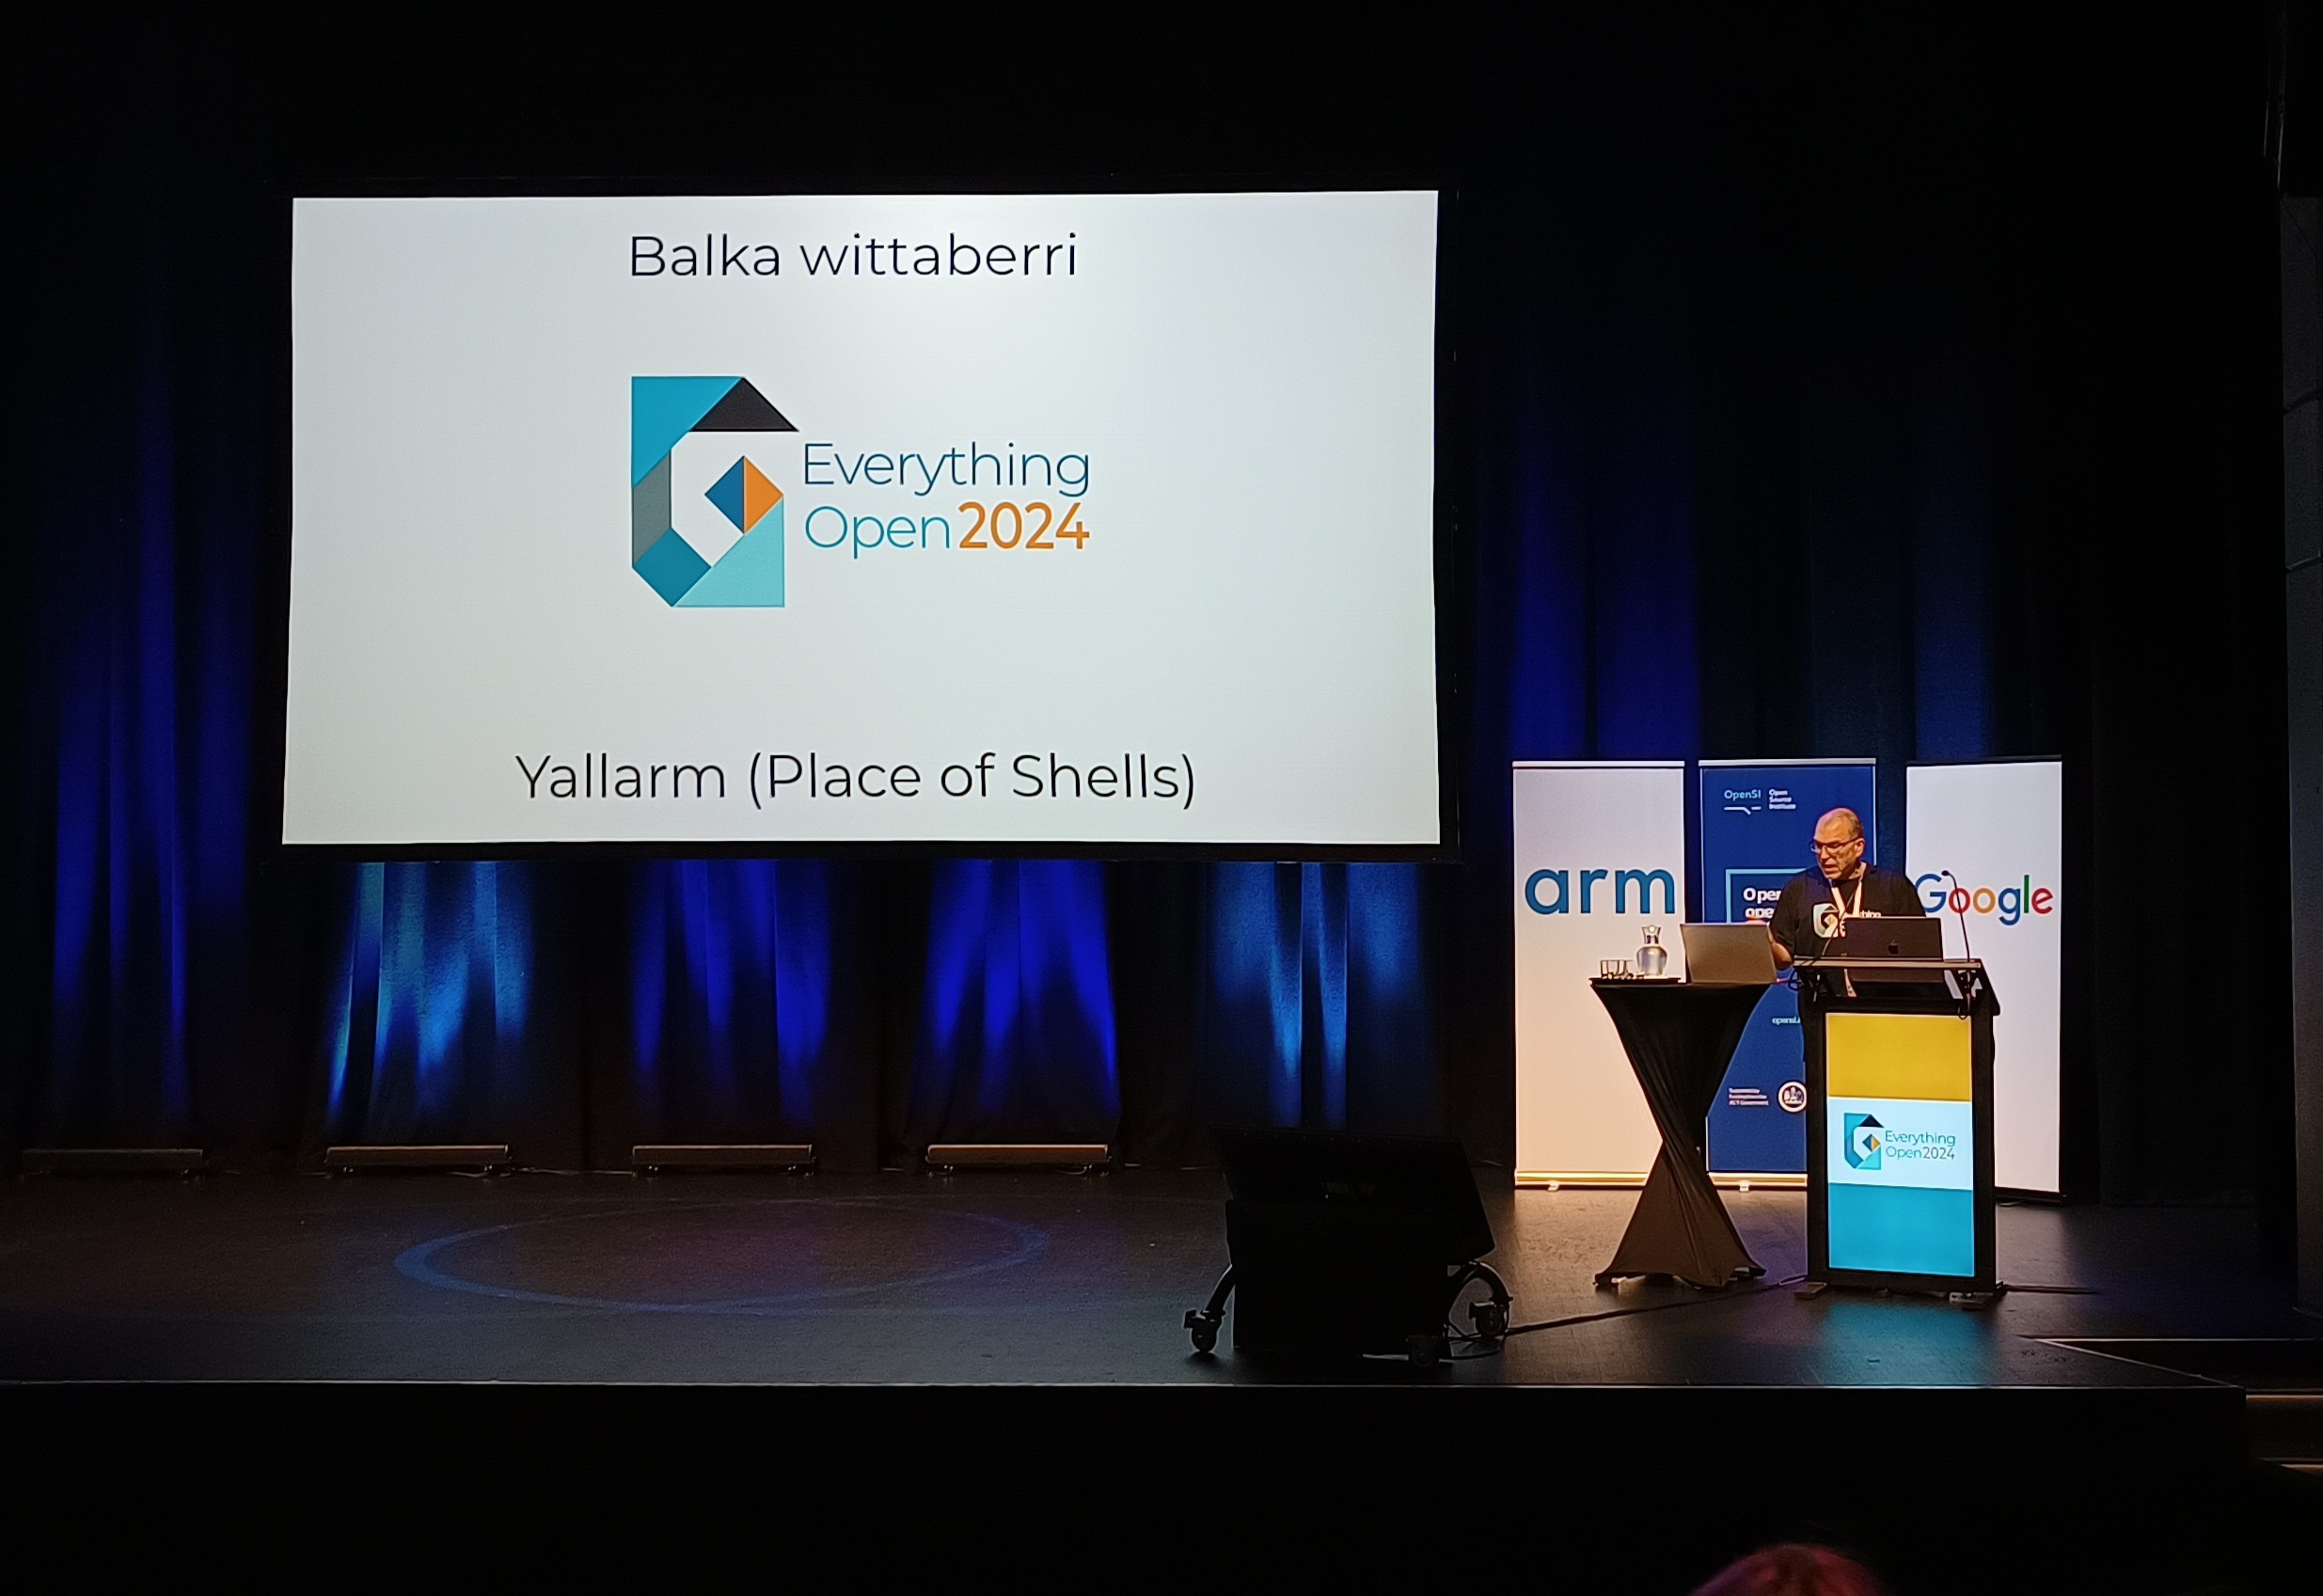 Rob Thomas on stage with slide reading:
Balkan wittaberri
Yallarm (Place of Shells)